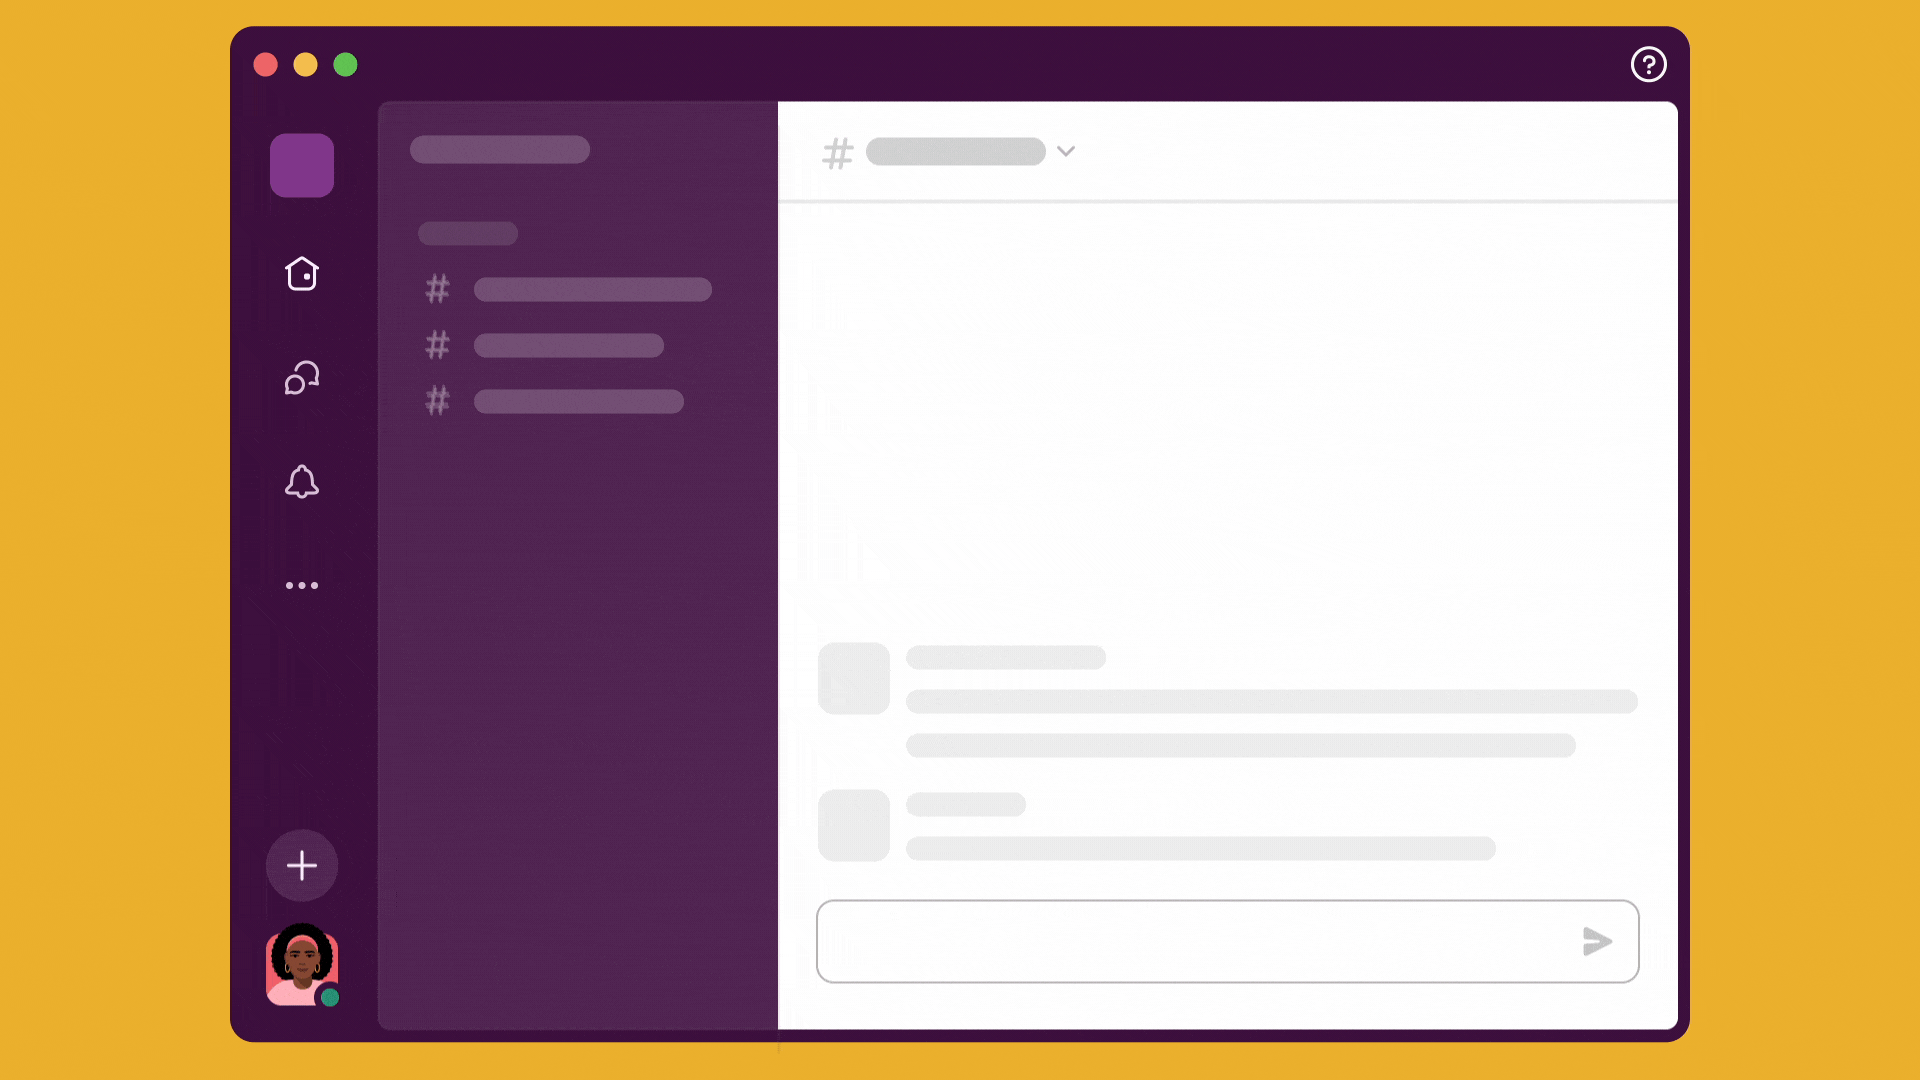 Navigating the Slack interface to create a canvas, add content to it, and then share the canvas in a channel